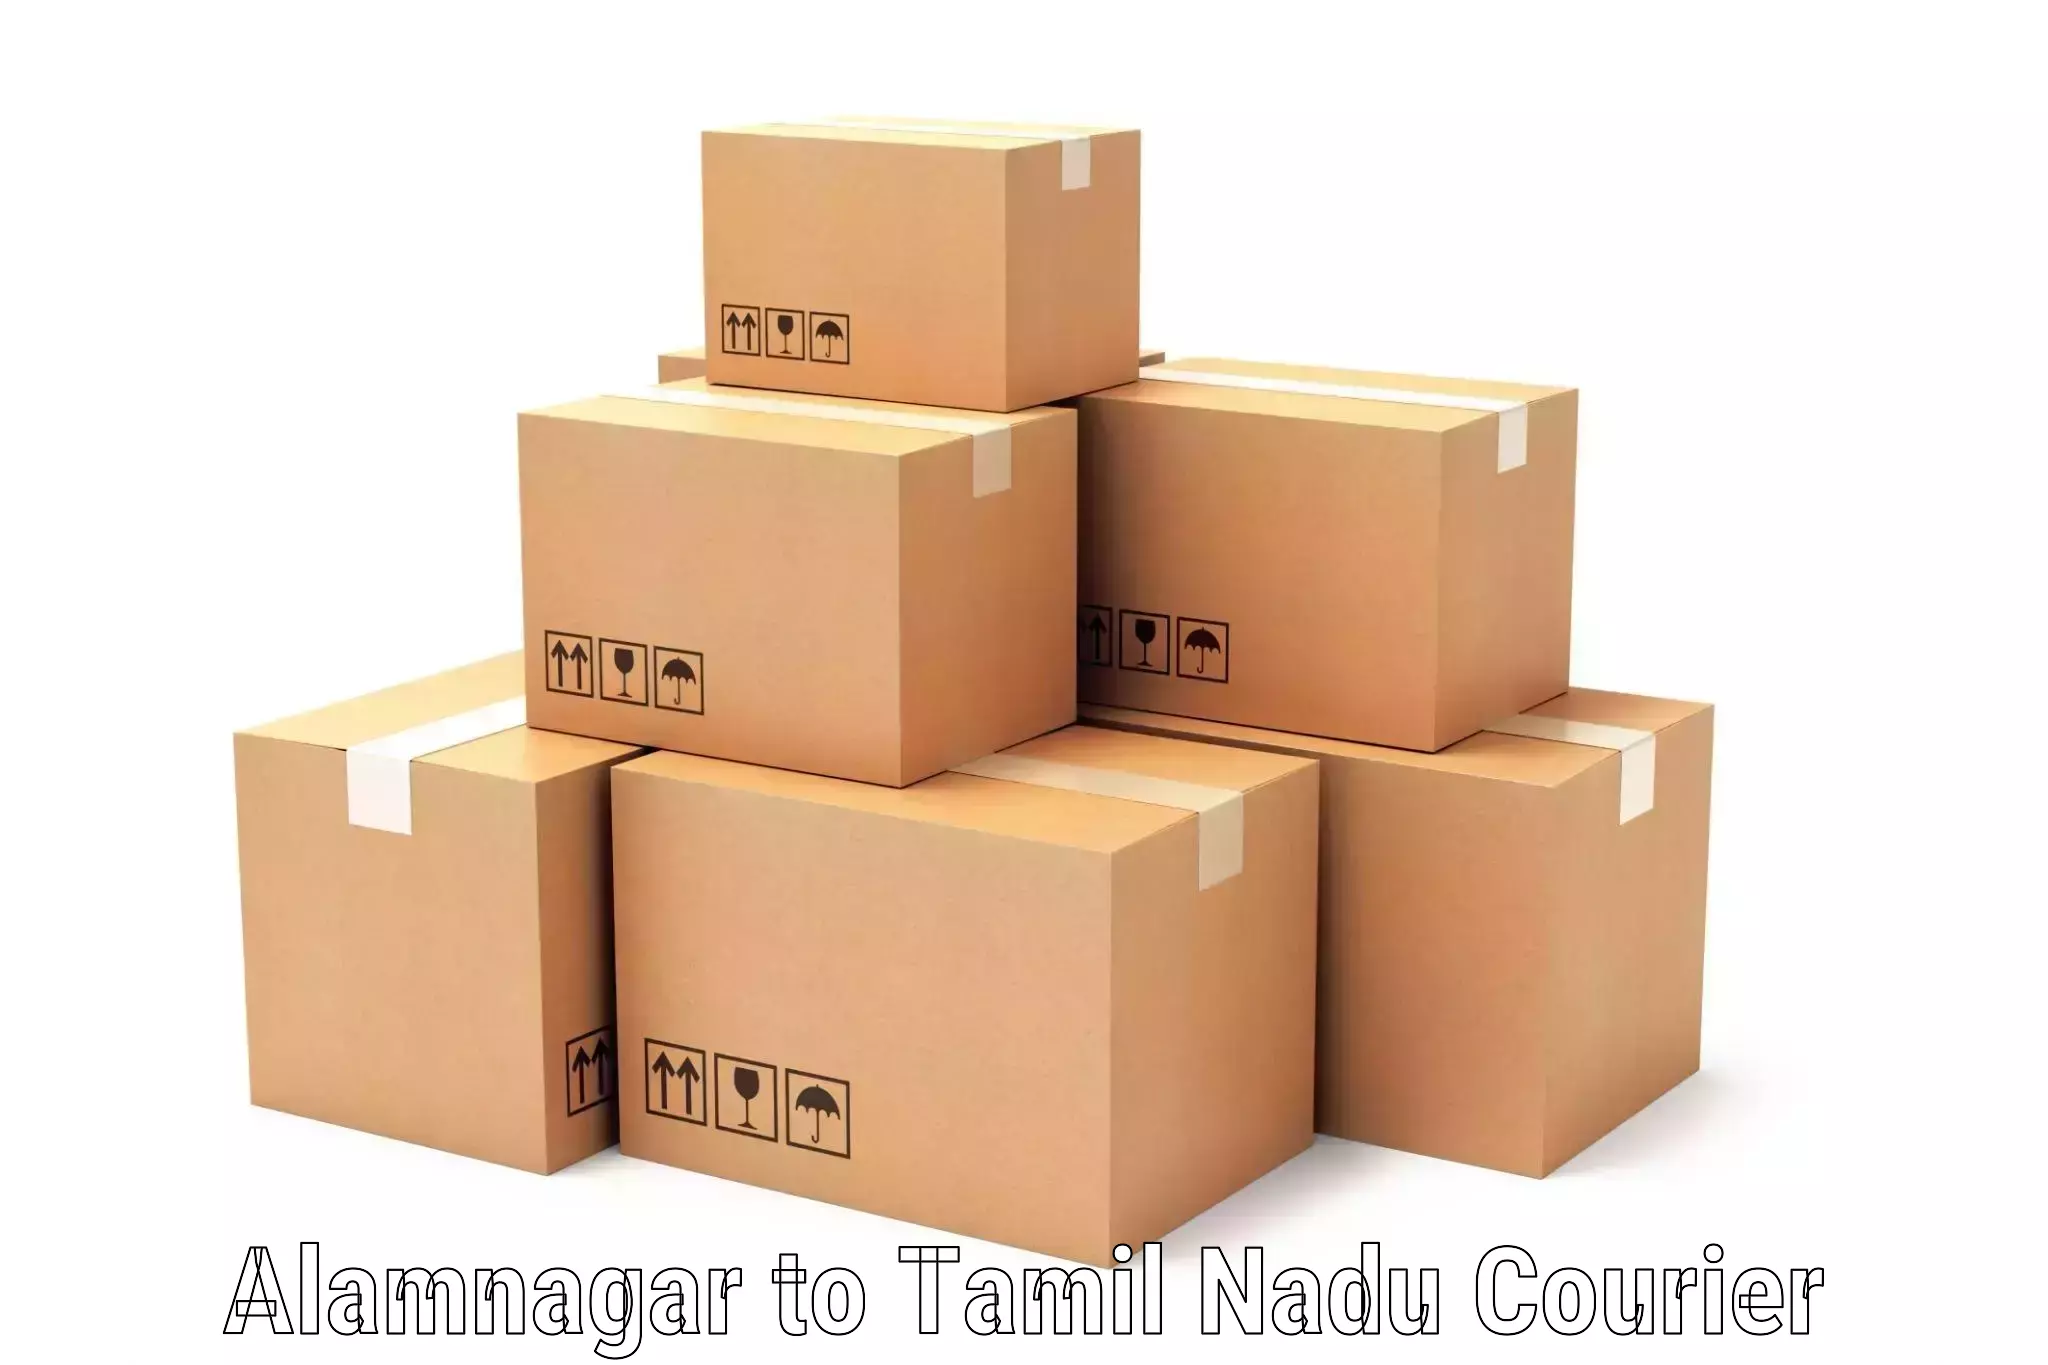 Bulk shipping discounts Alamnagar to Vellore Institute of Technology